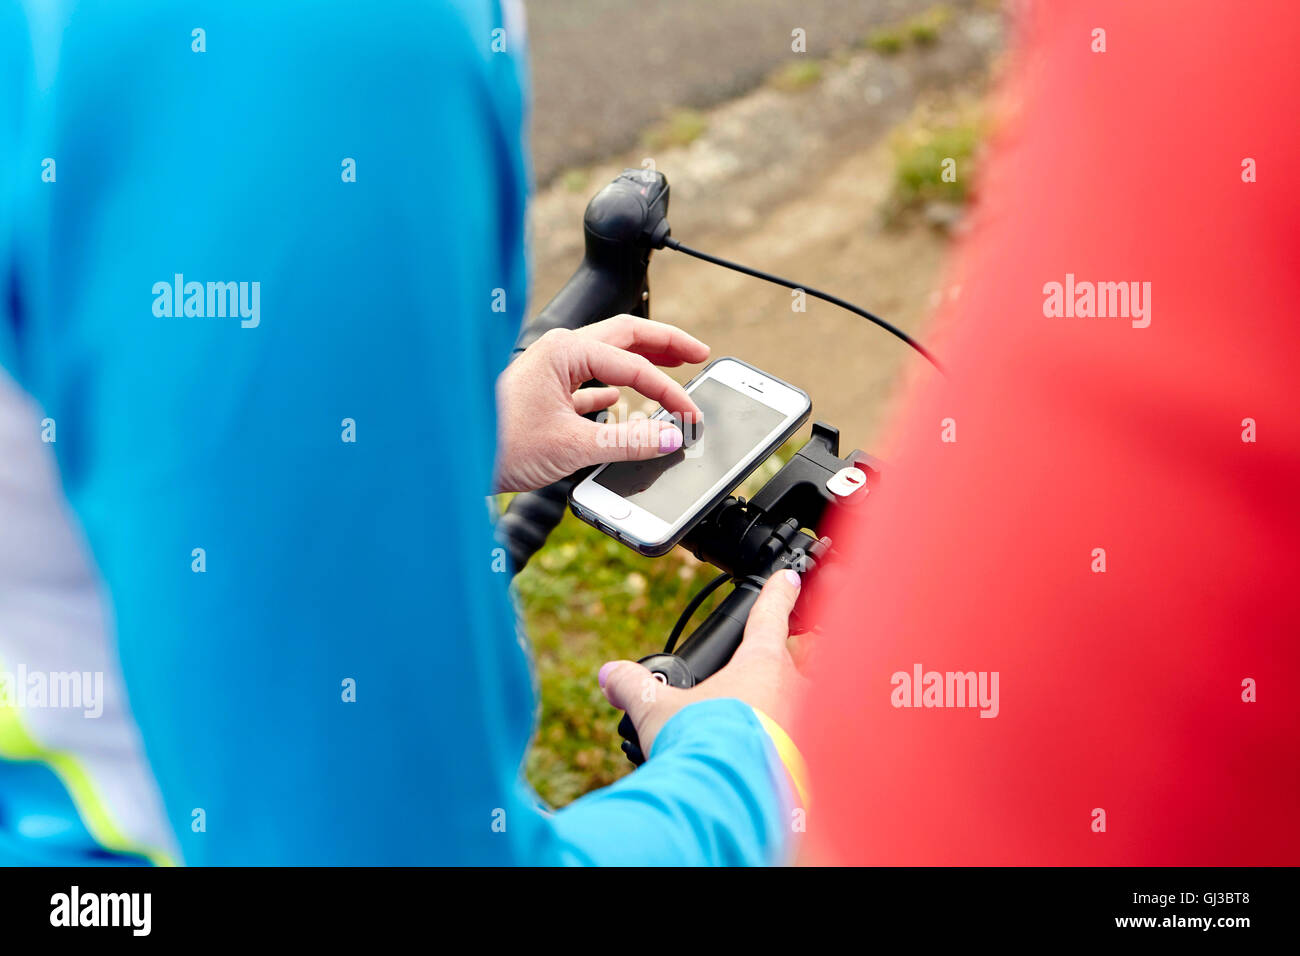 Cyclists stopping to use GPS on mobile phone Stock Photo